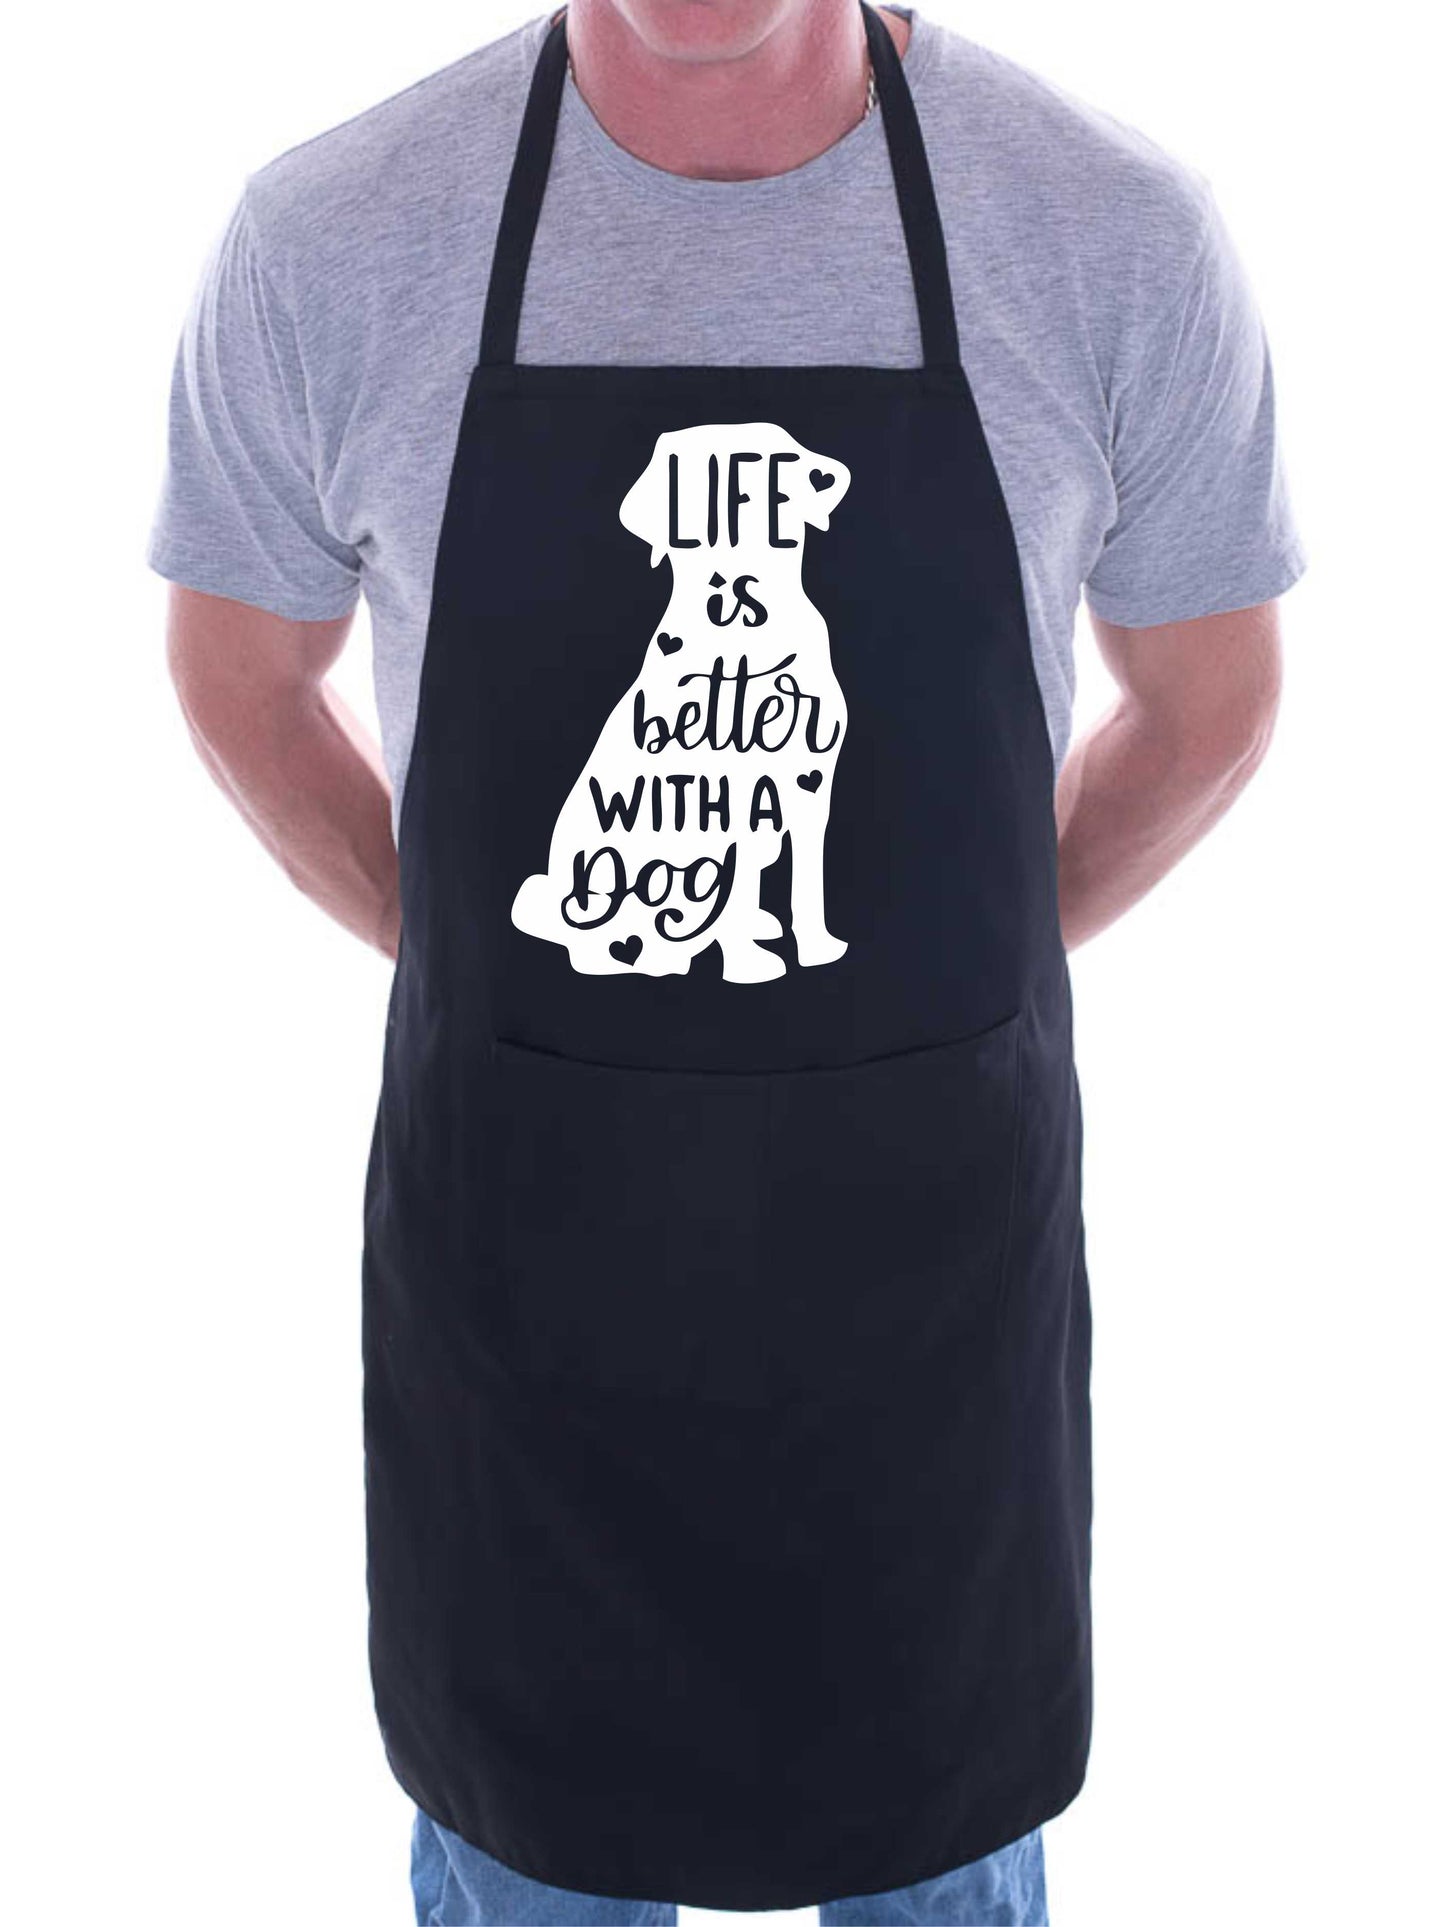 Life Is Better With A Dog Apron Dog Lover Novelty Baking BBQ Cooking